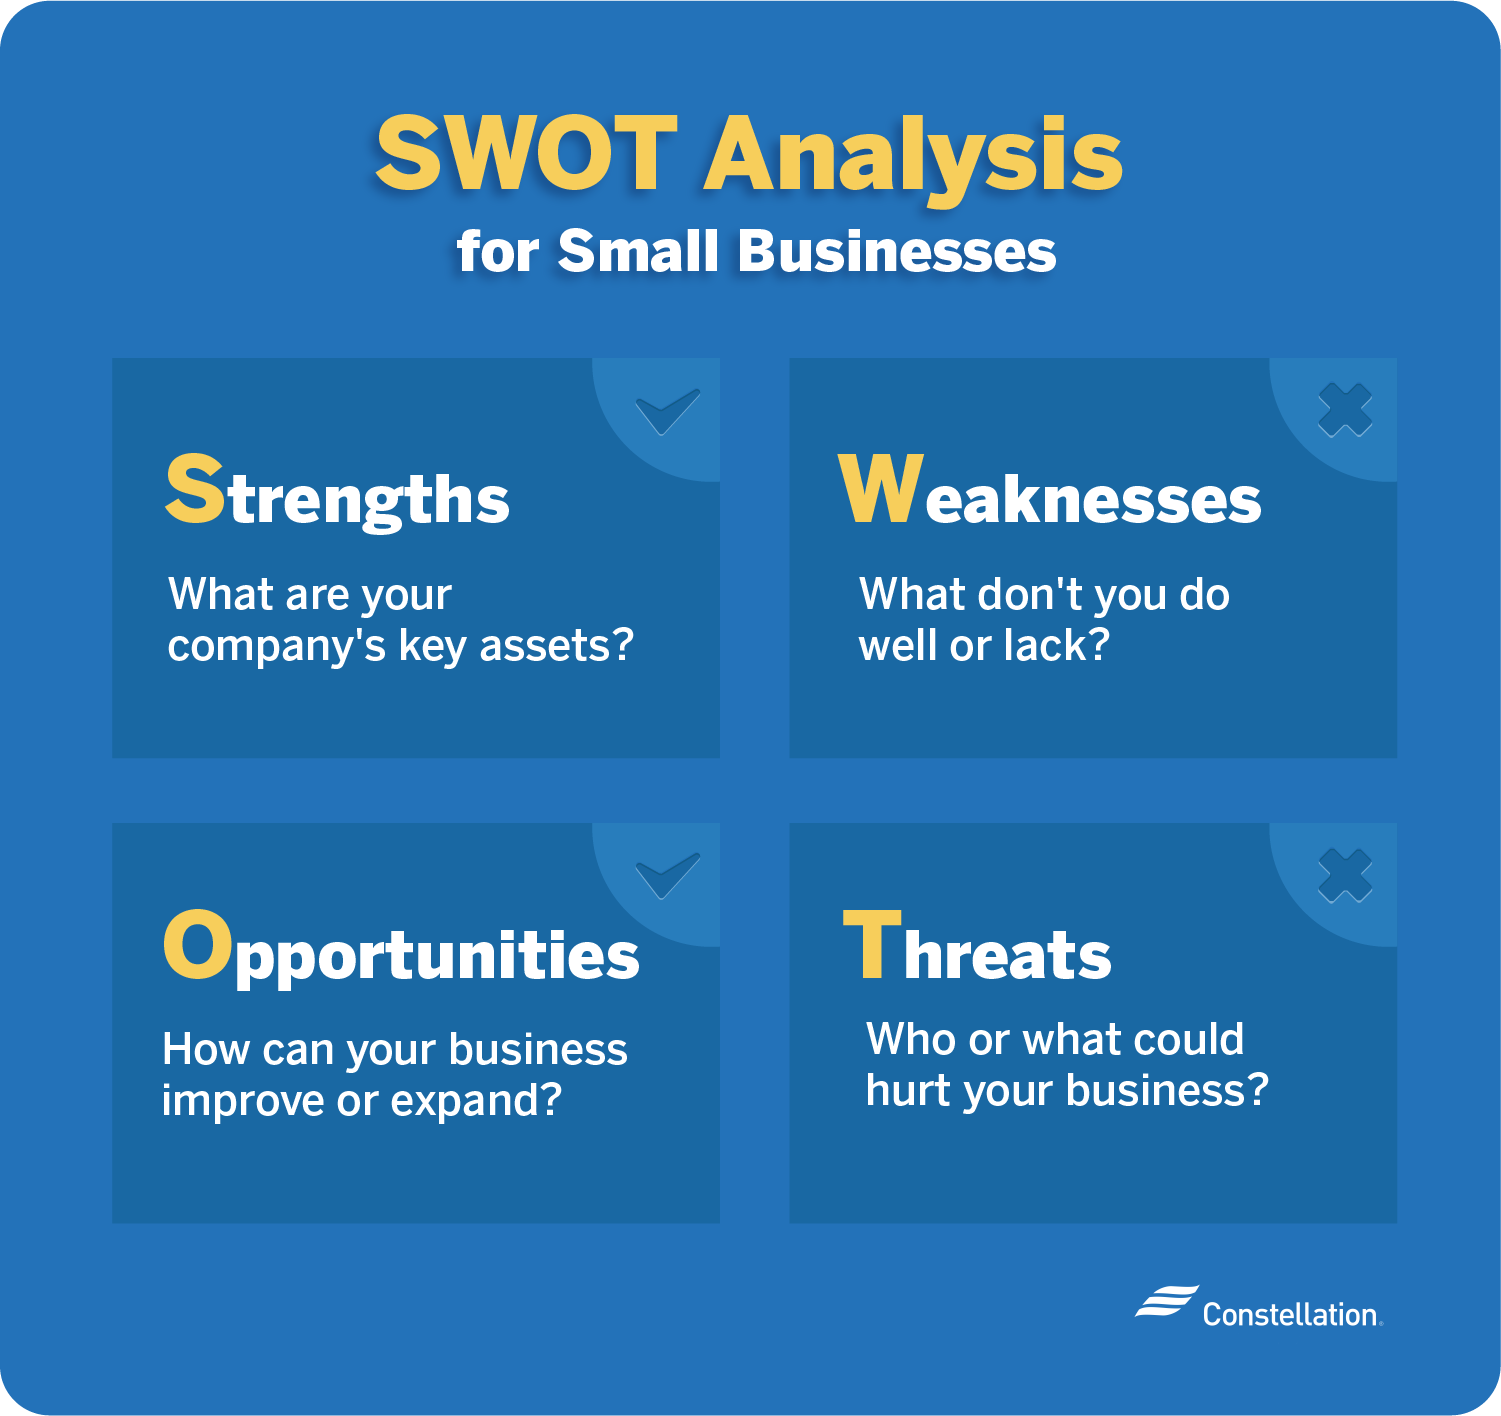 The SWOT technique for small businesses